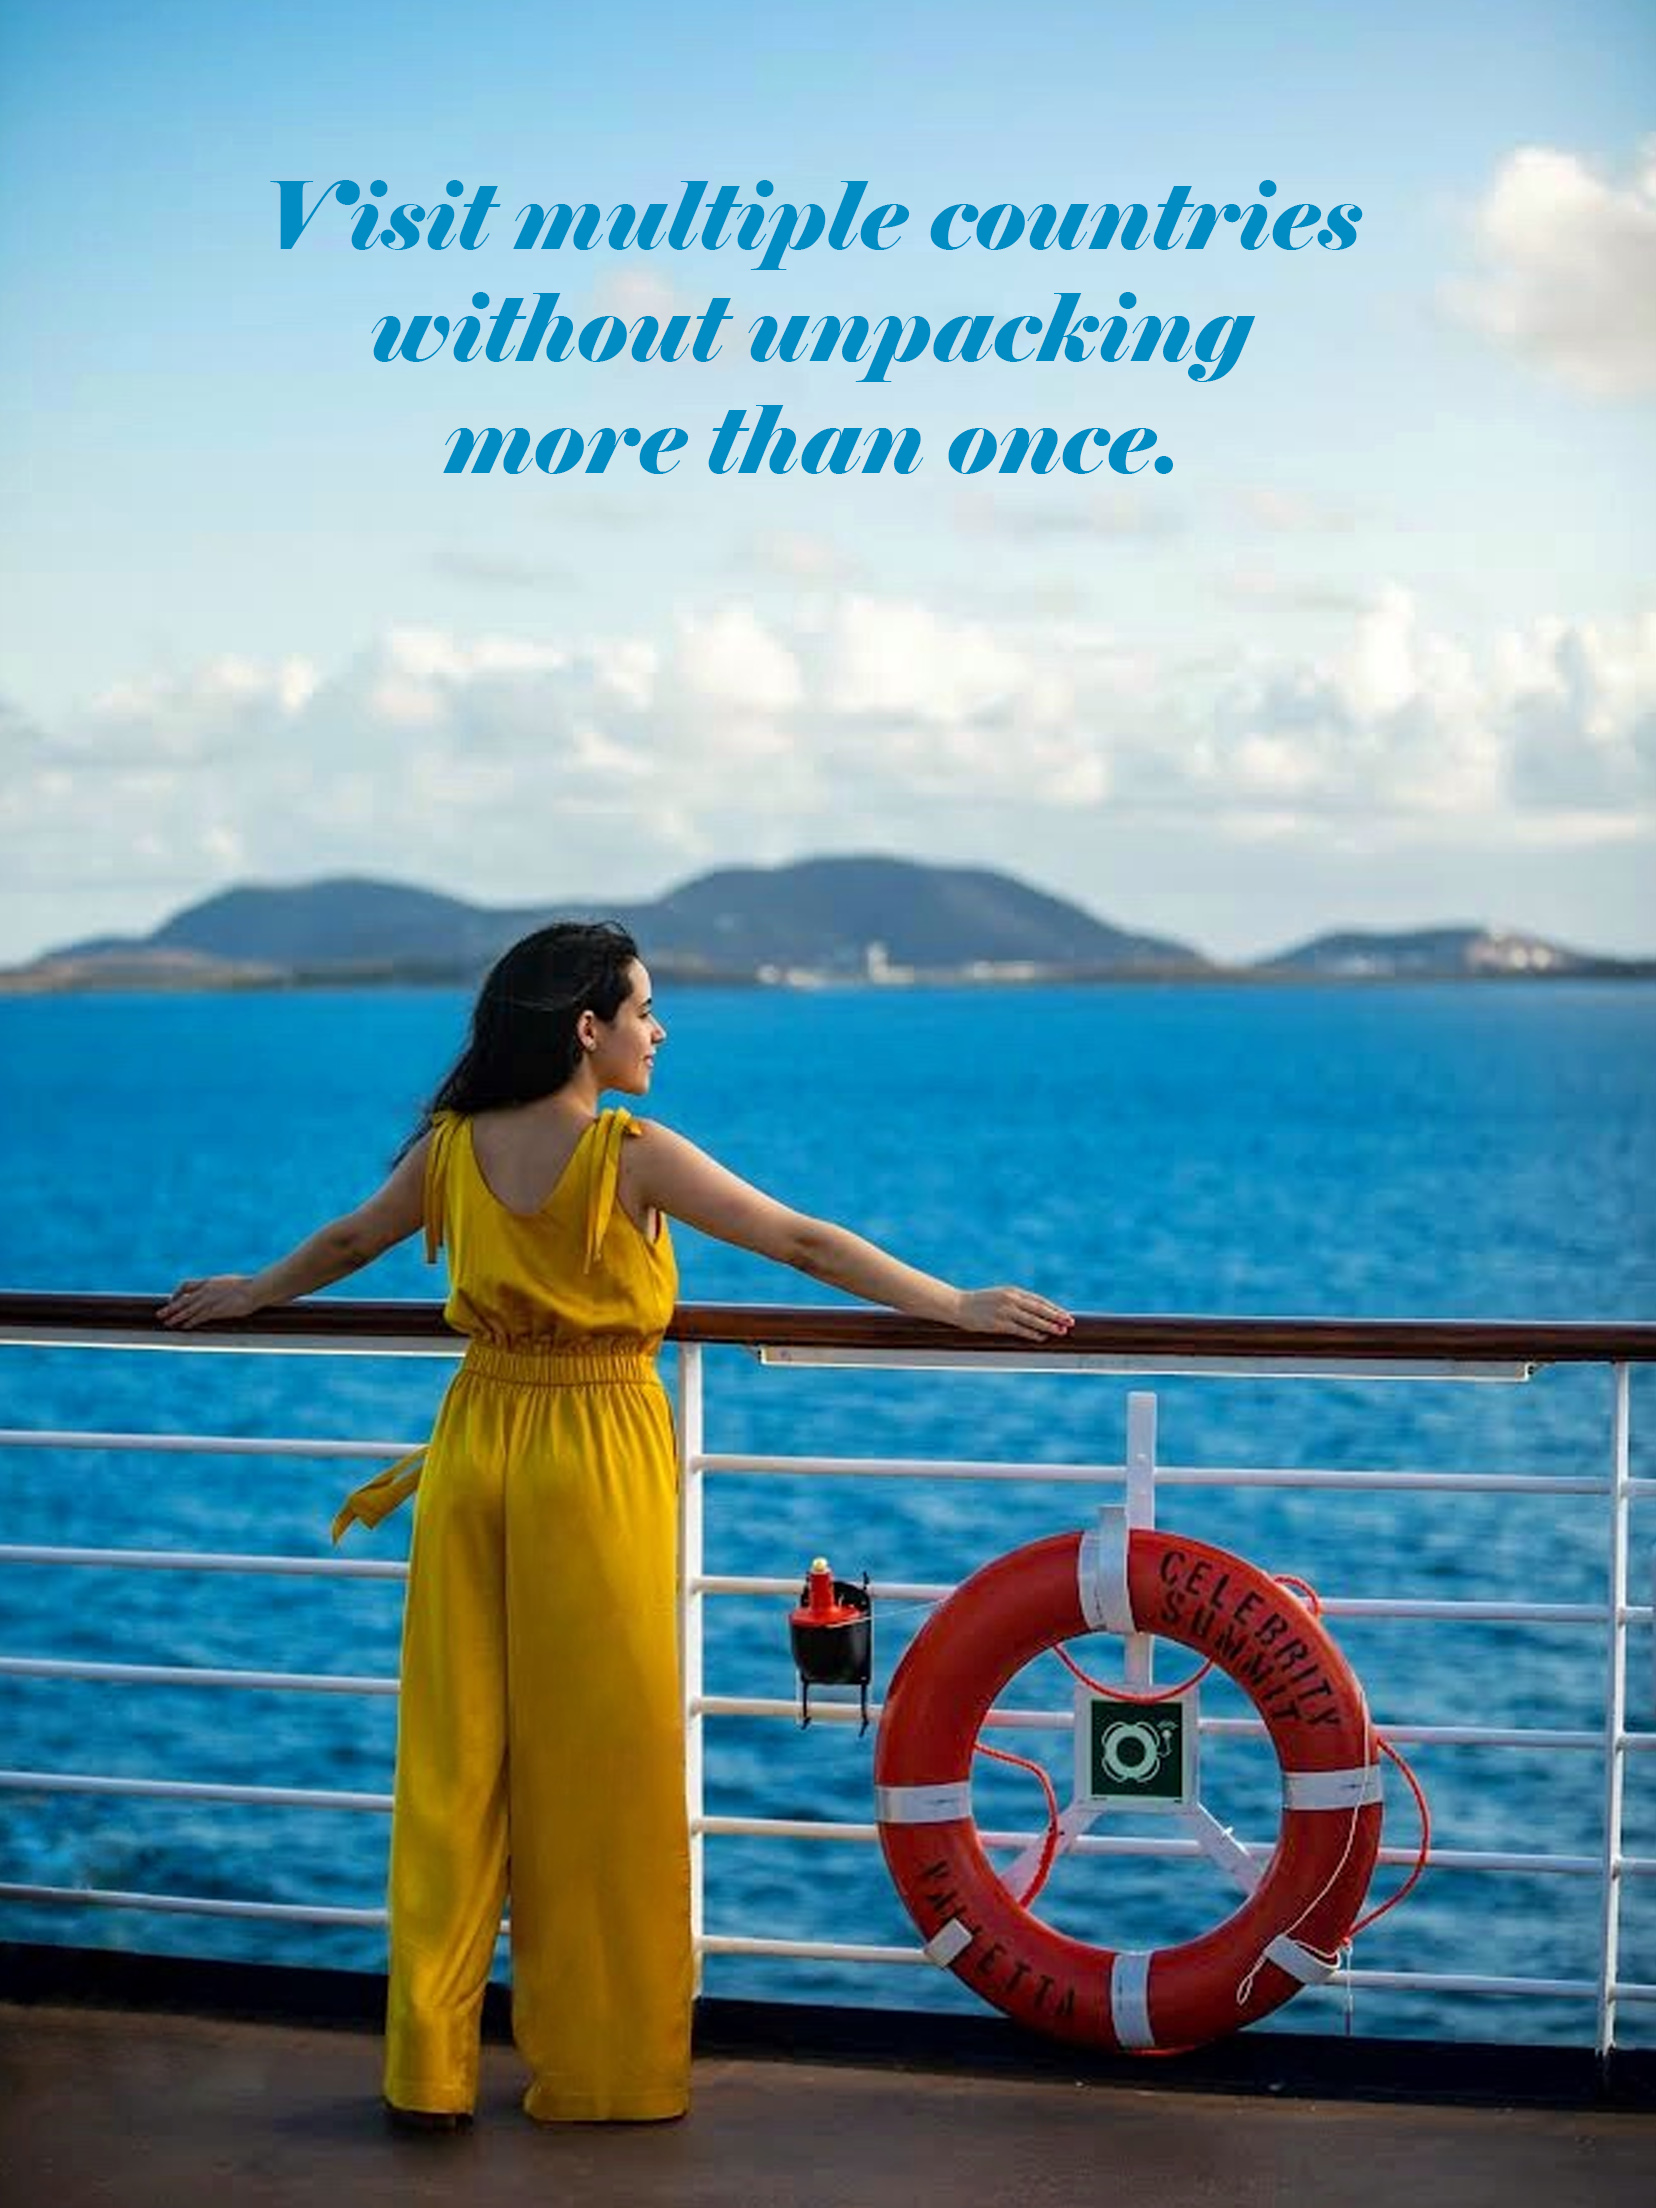 Visit multiple countries without unpacking more than once Celebrity Cruises Summit Revolution Guide